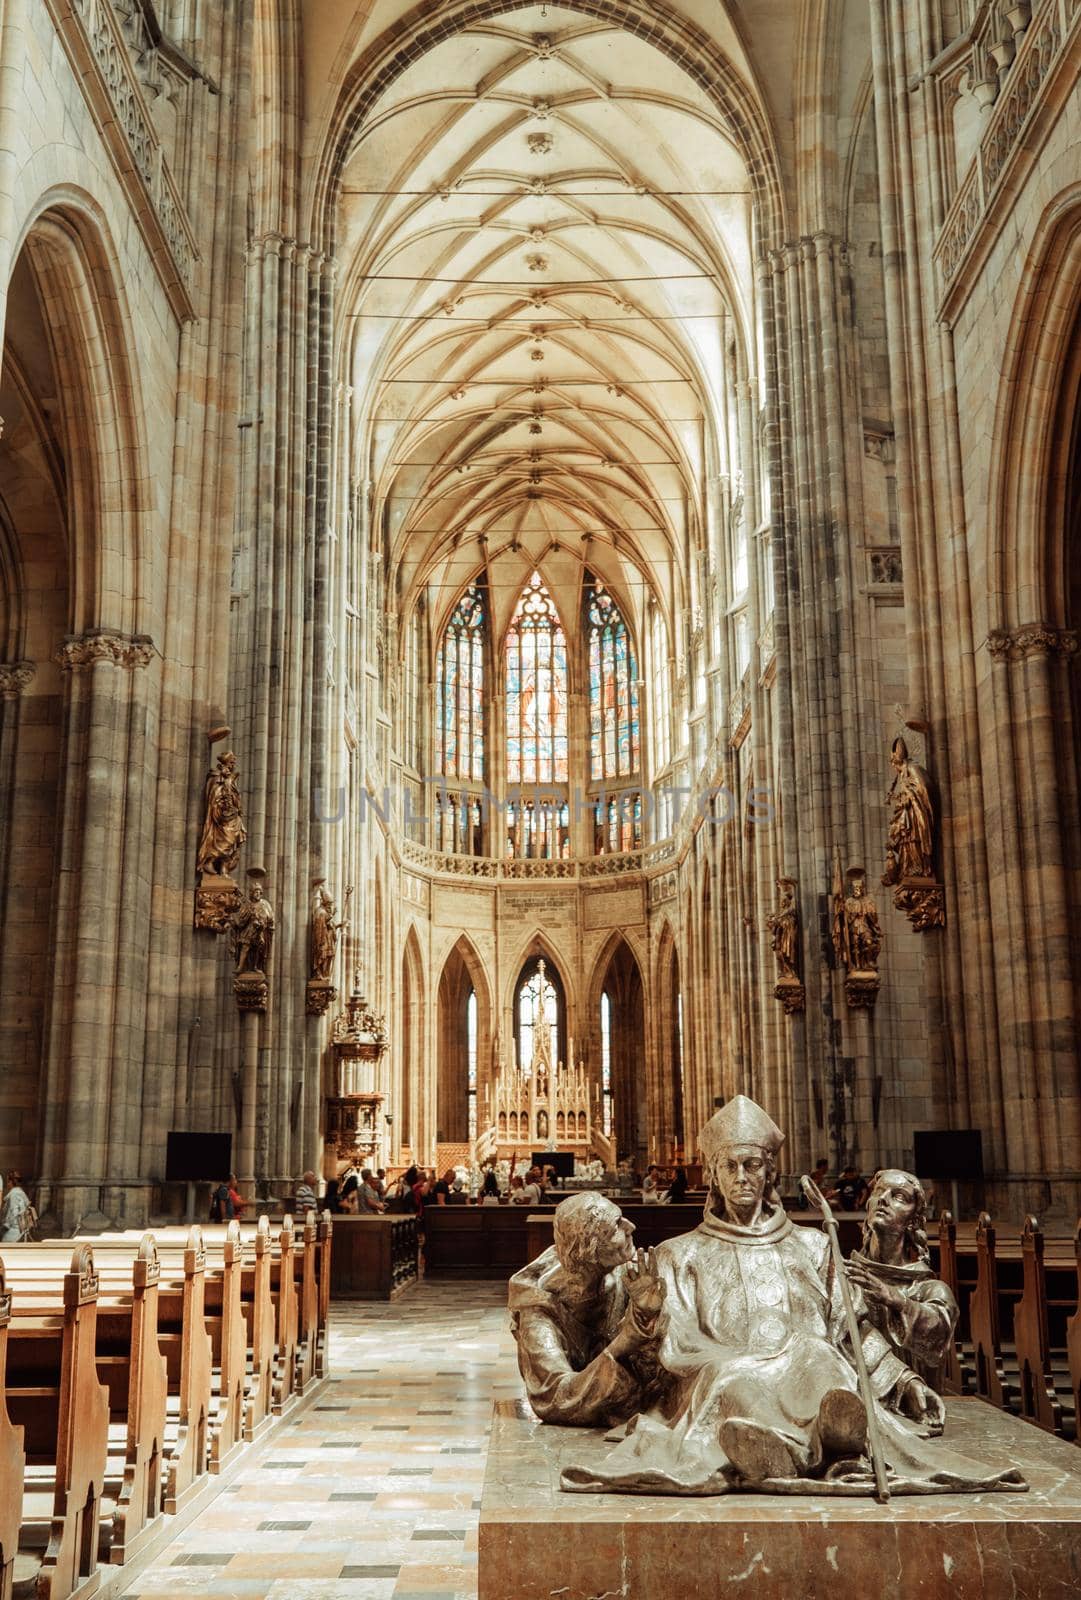 Prague, Czech Republic - July 2022. Interior of St. Vitus cathedral. Architecture in gothic style, details of masterpiece religious building. High quality photo